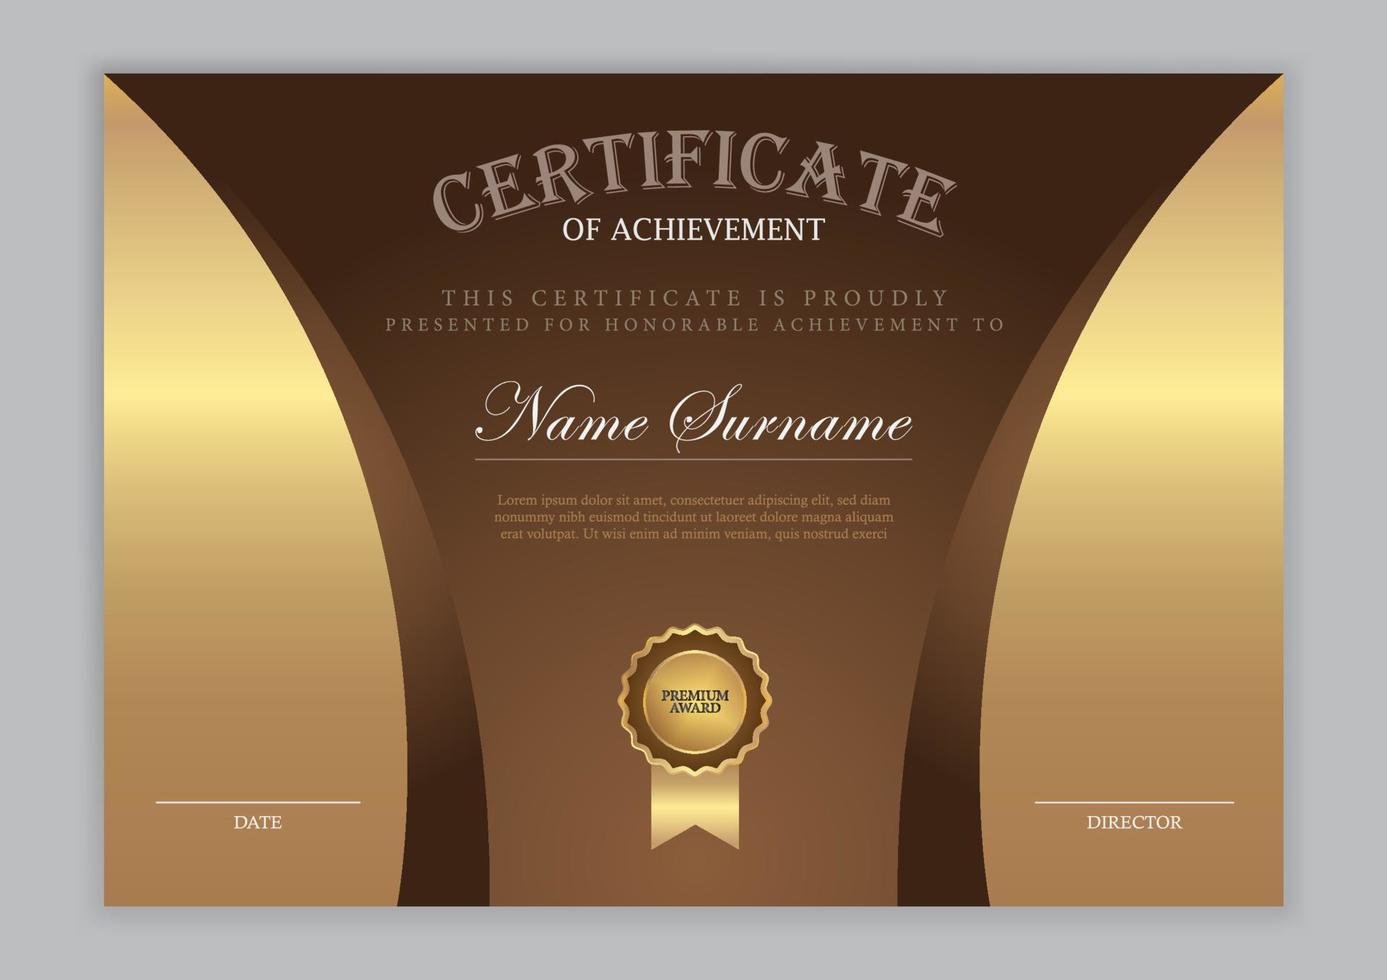 Certificate template modern style vector